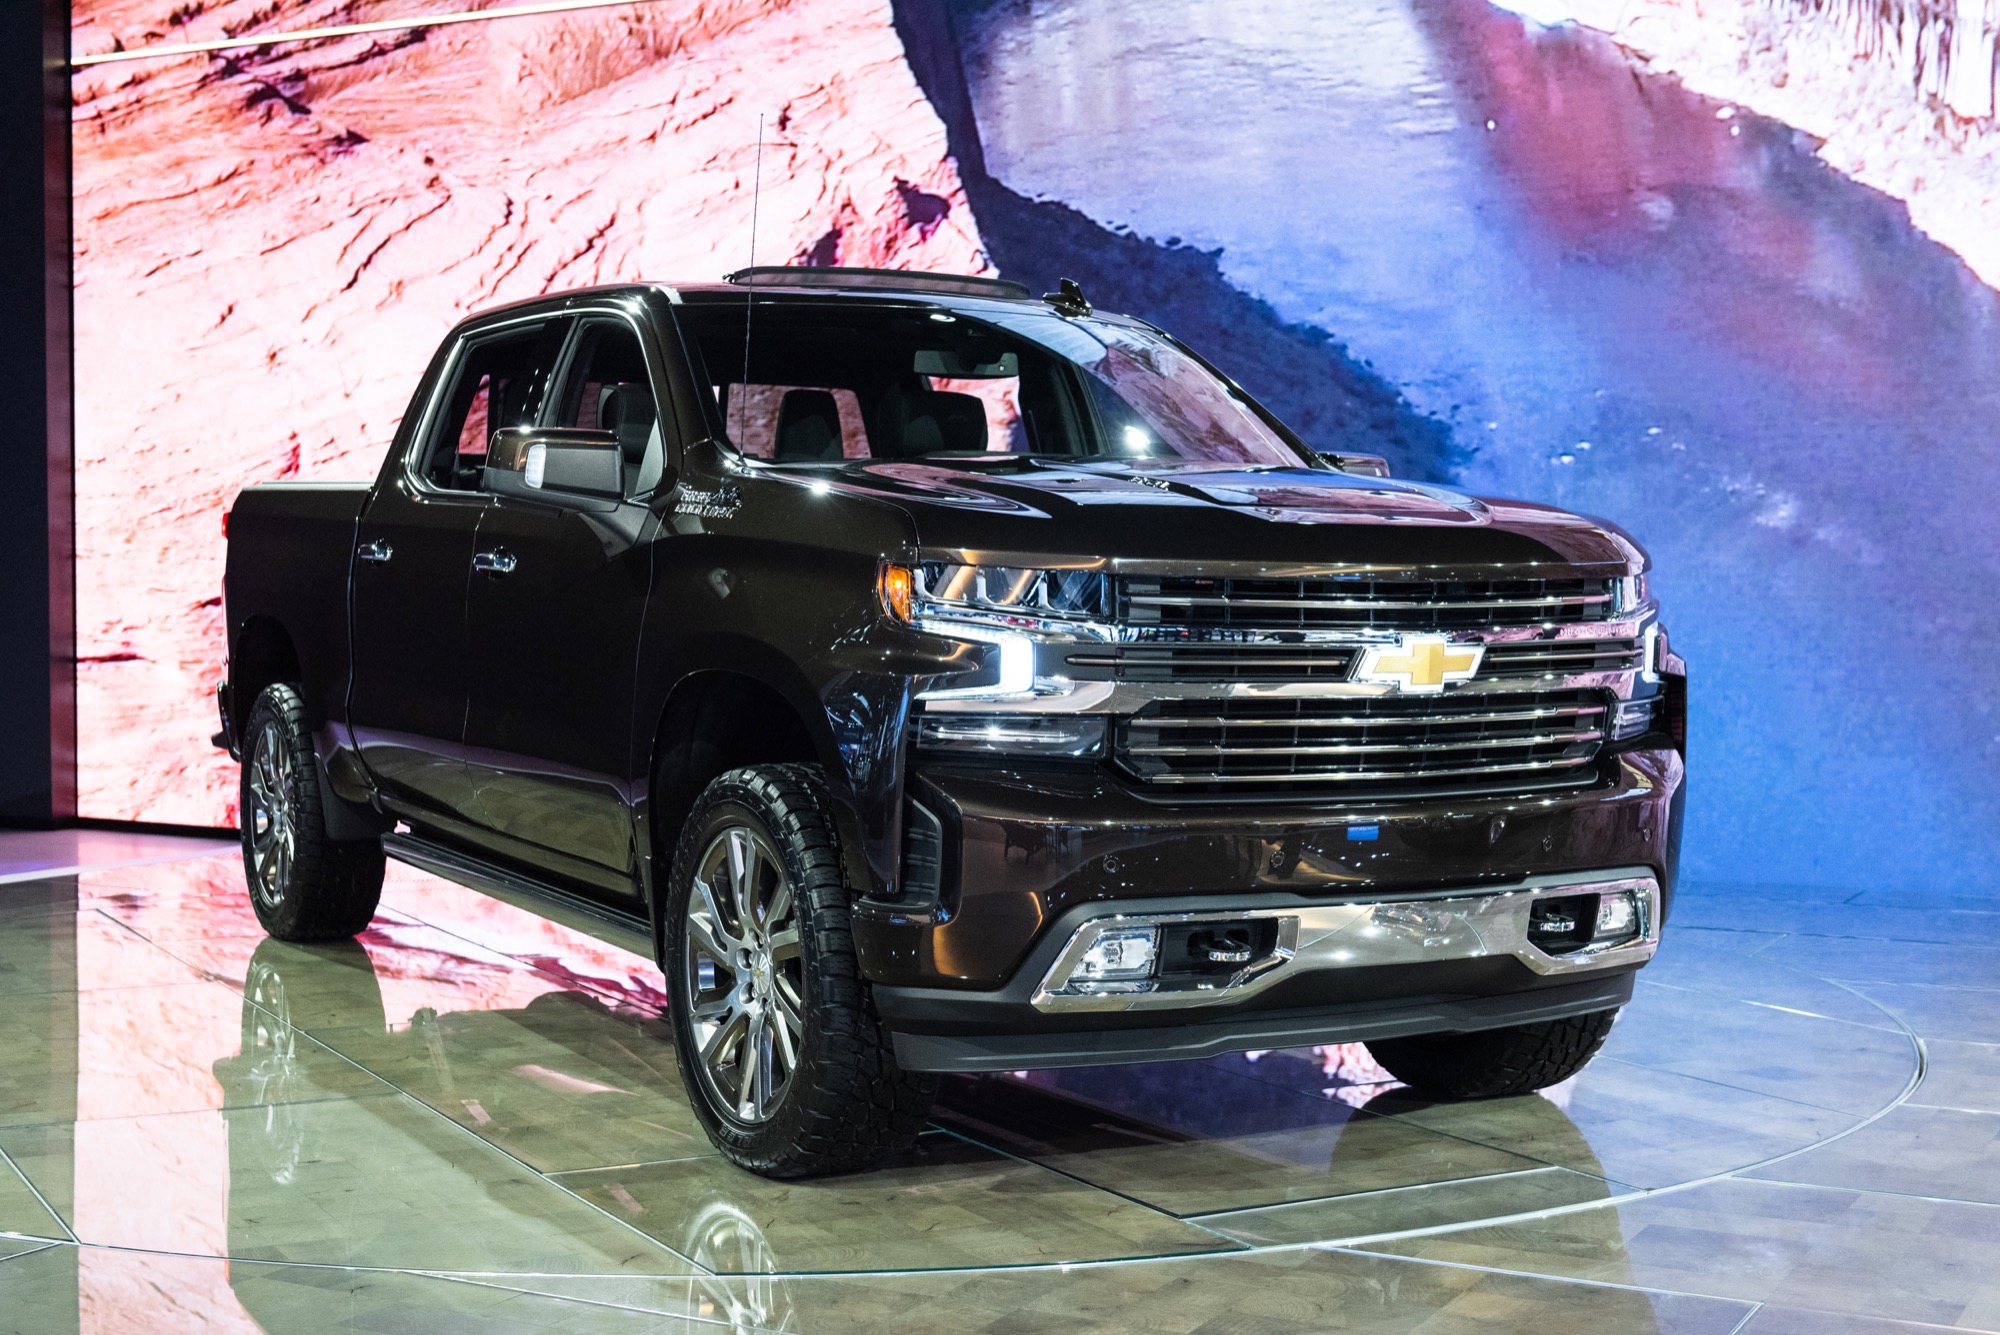 2020 Silverado 1500: Here's What's New And Different | GM Authority